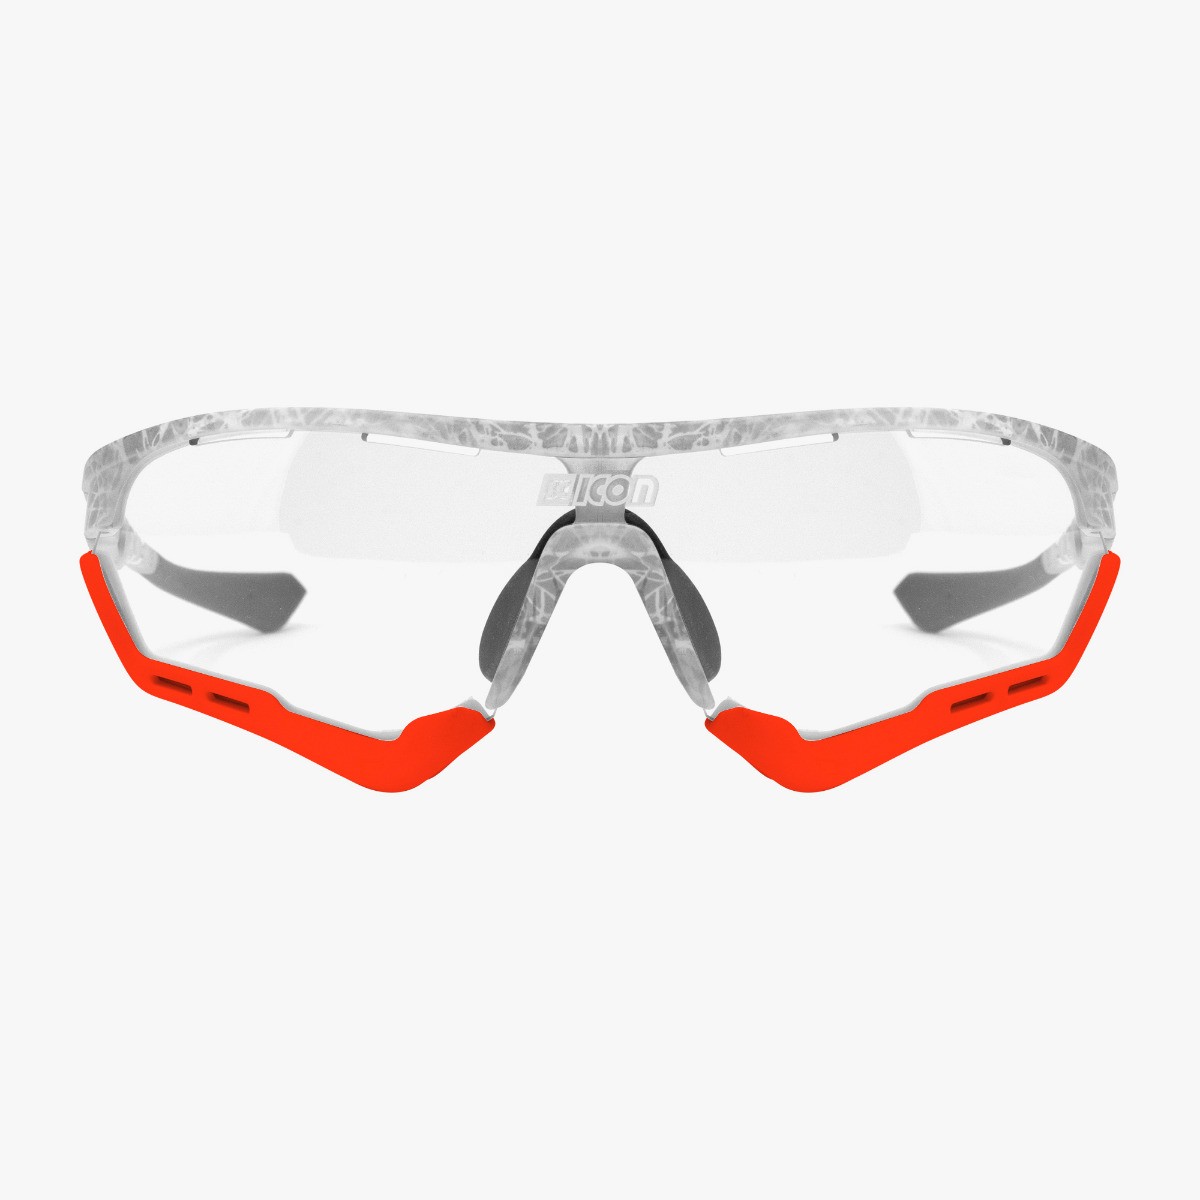 Scicon Sports | Aerotech Sport Cycling Performance Sunglasses - Frozen White / Photocromatic Red - EY13160503